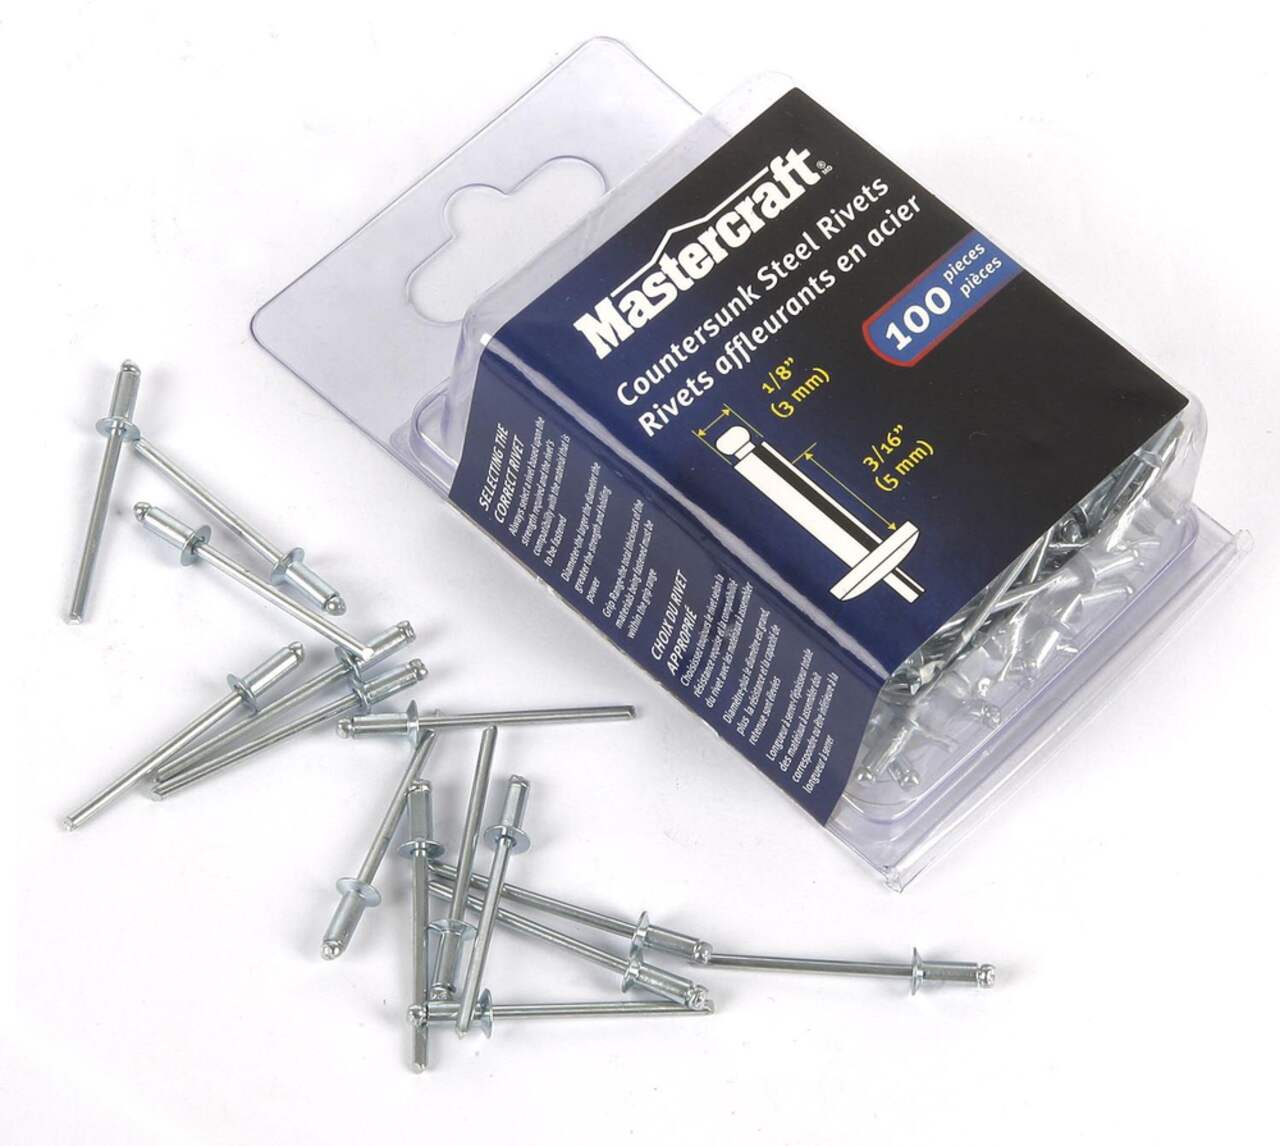 https://media-www.canadiantire.ca/product/fixing/tools/manual-fastening/0584722/rivets-steel-countersunk-1-8-short-6dc83188-0e9e-4168-ba0a-96a5aca26572.png?imdensity=1&imwidth=640&impolicy=mZoom